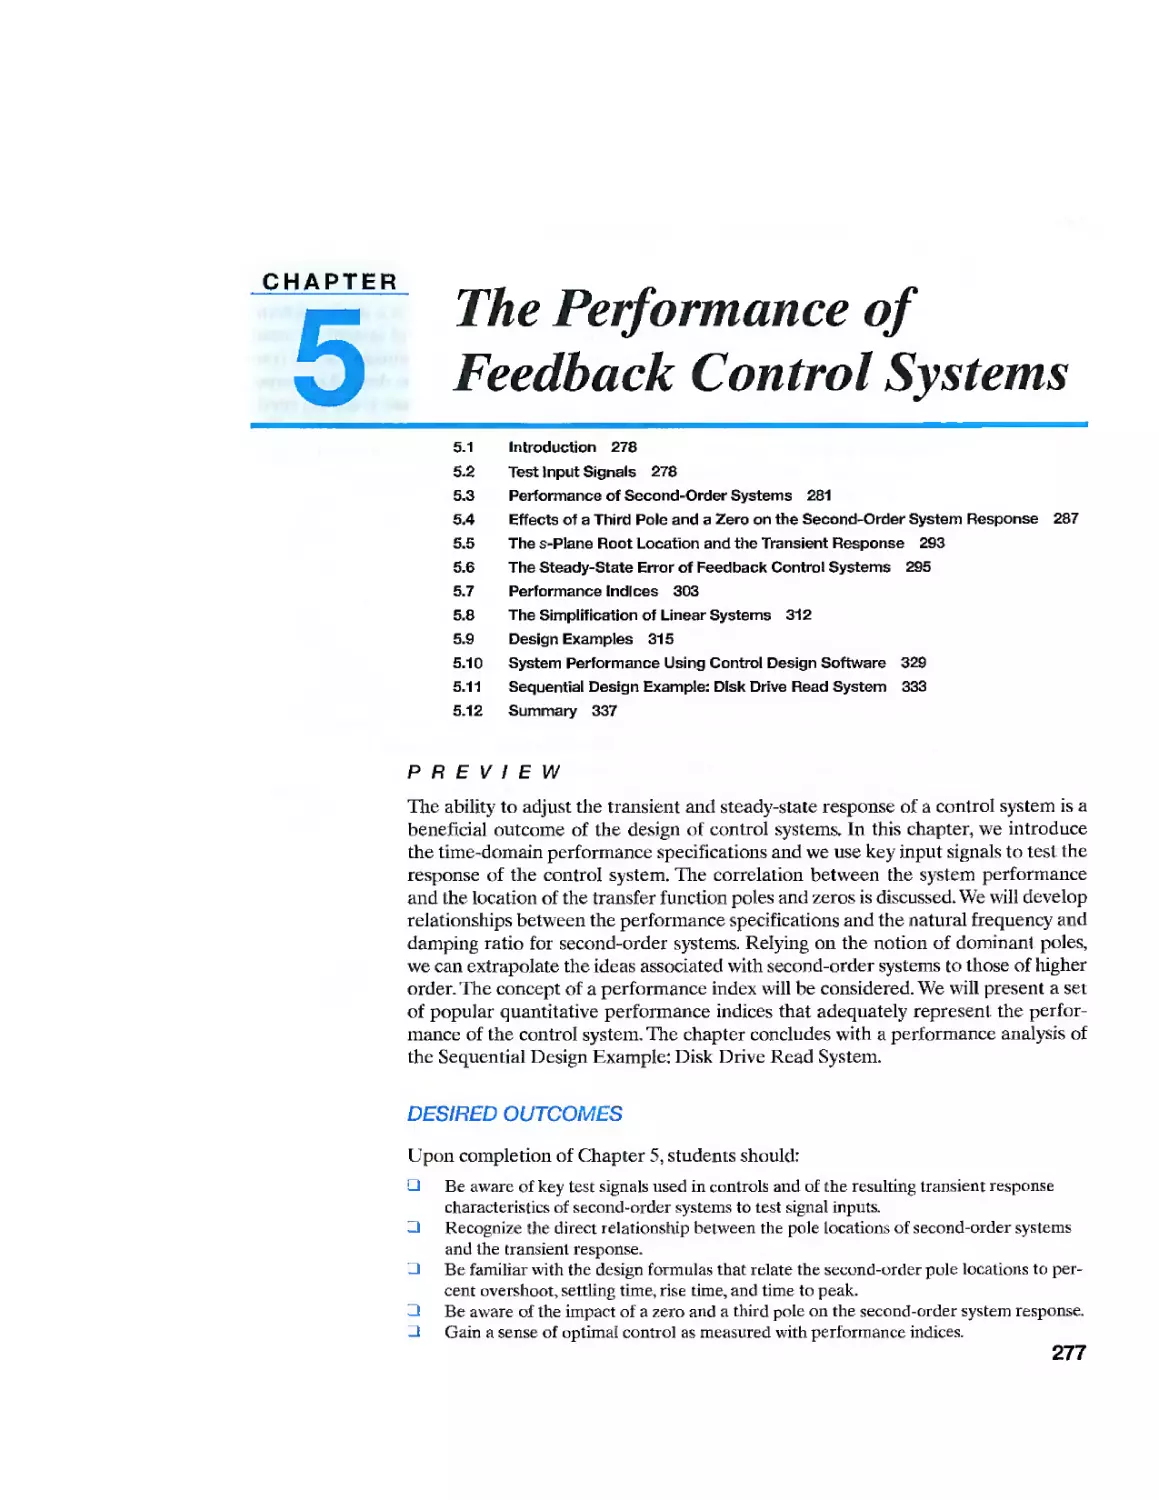 5 The Performance of Feedback Control Systems